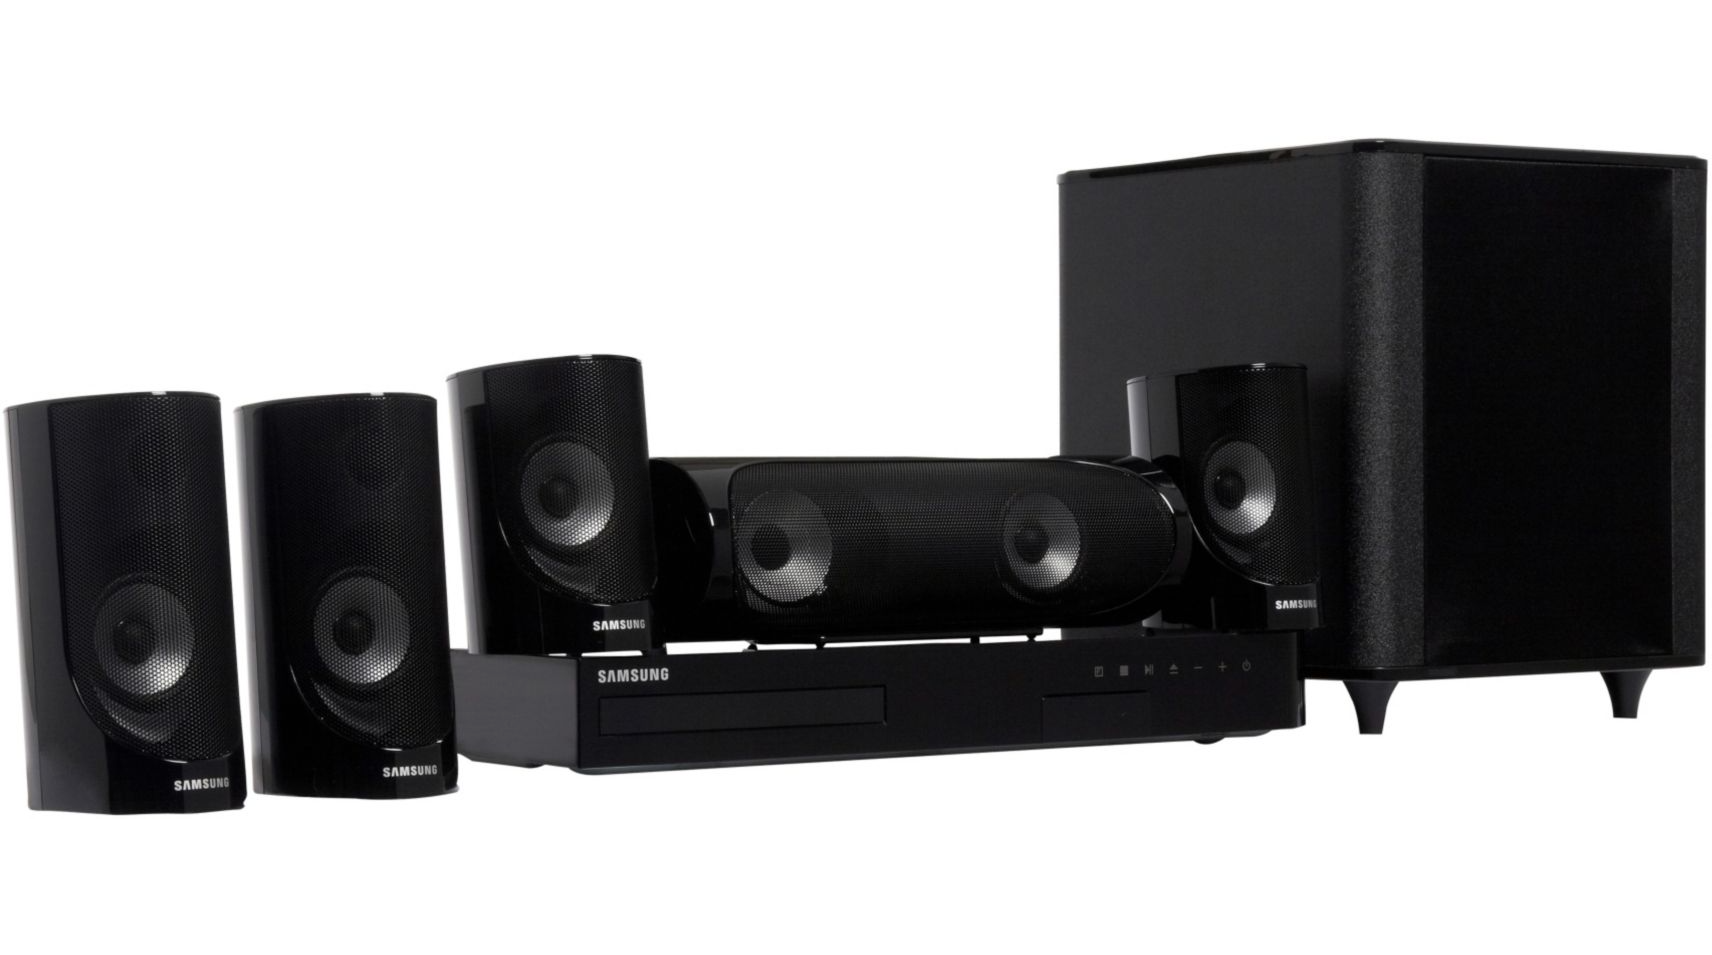 Samsung Ht Tz215 Ch Home Cinema Theatre System With Ht Tz310 Speakers 